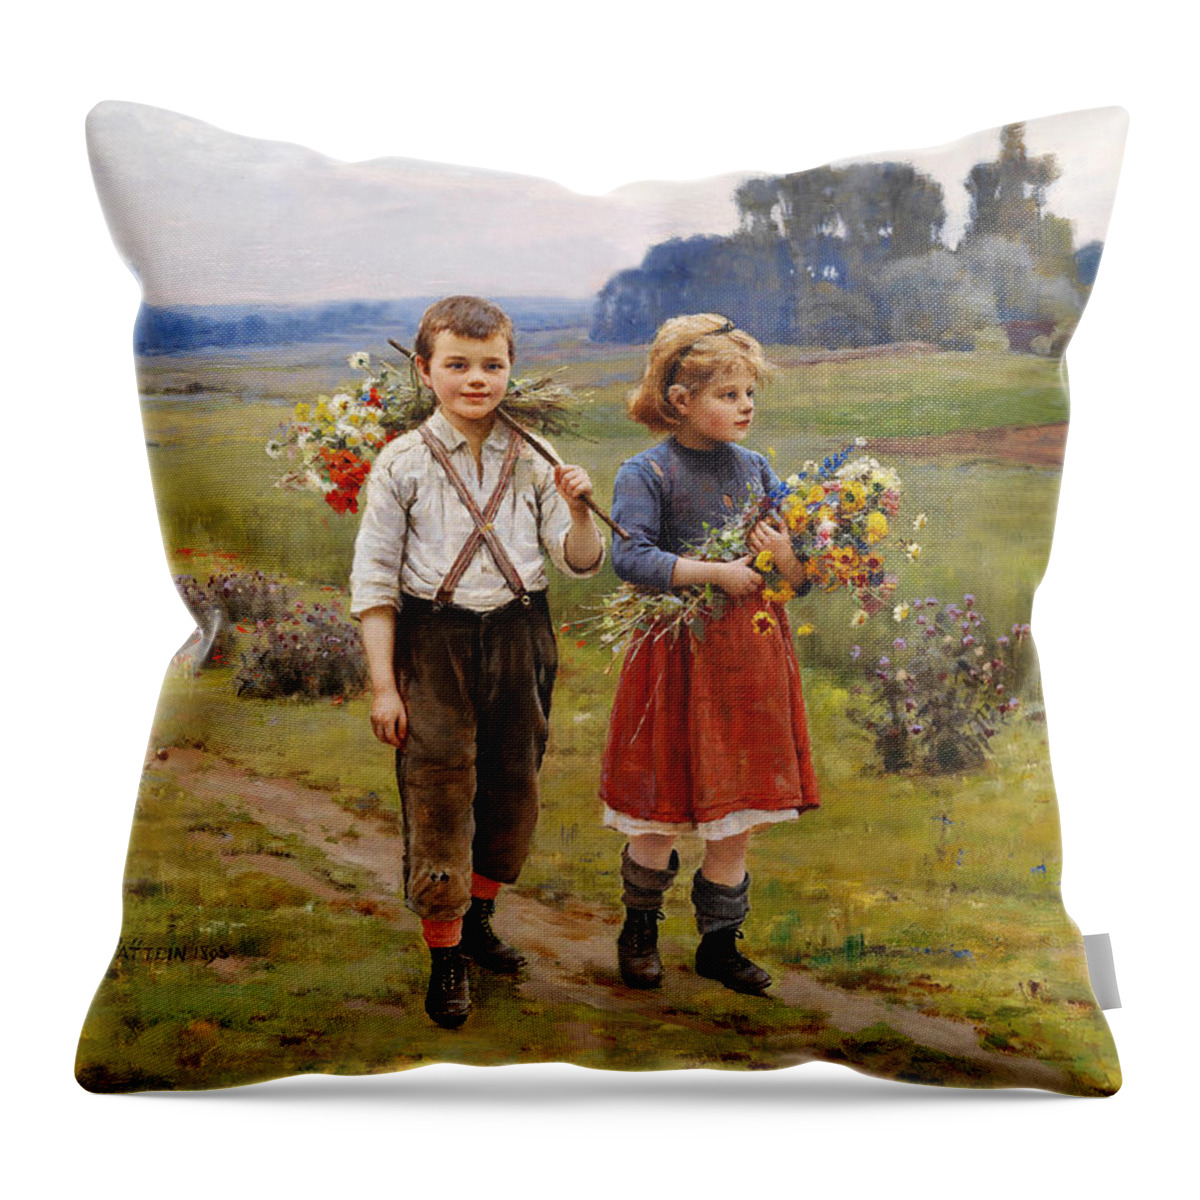 Cesar Pattein Throw Pillow featuring the digital art Children On The Way Home by Cesar Pattein